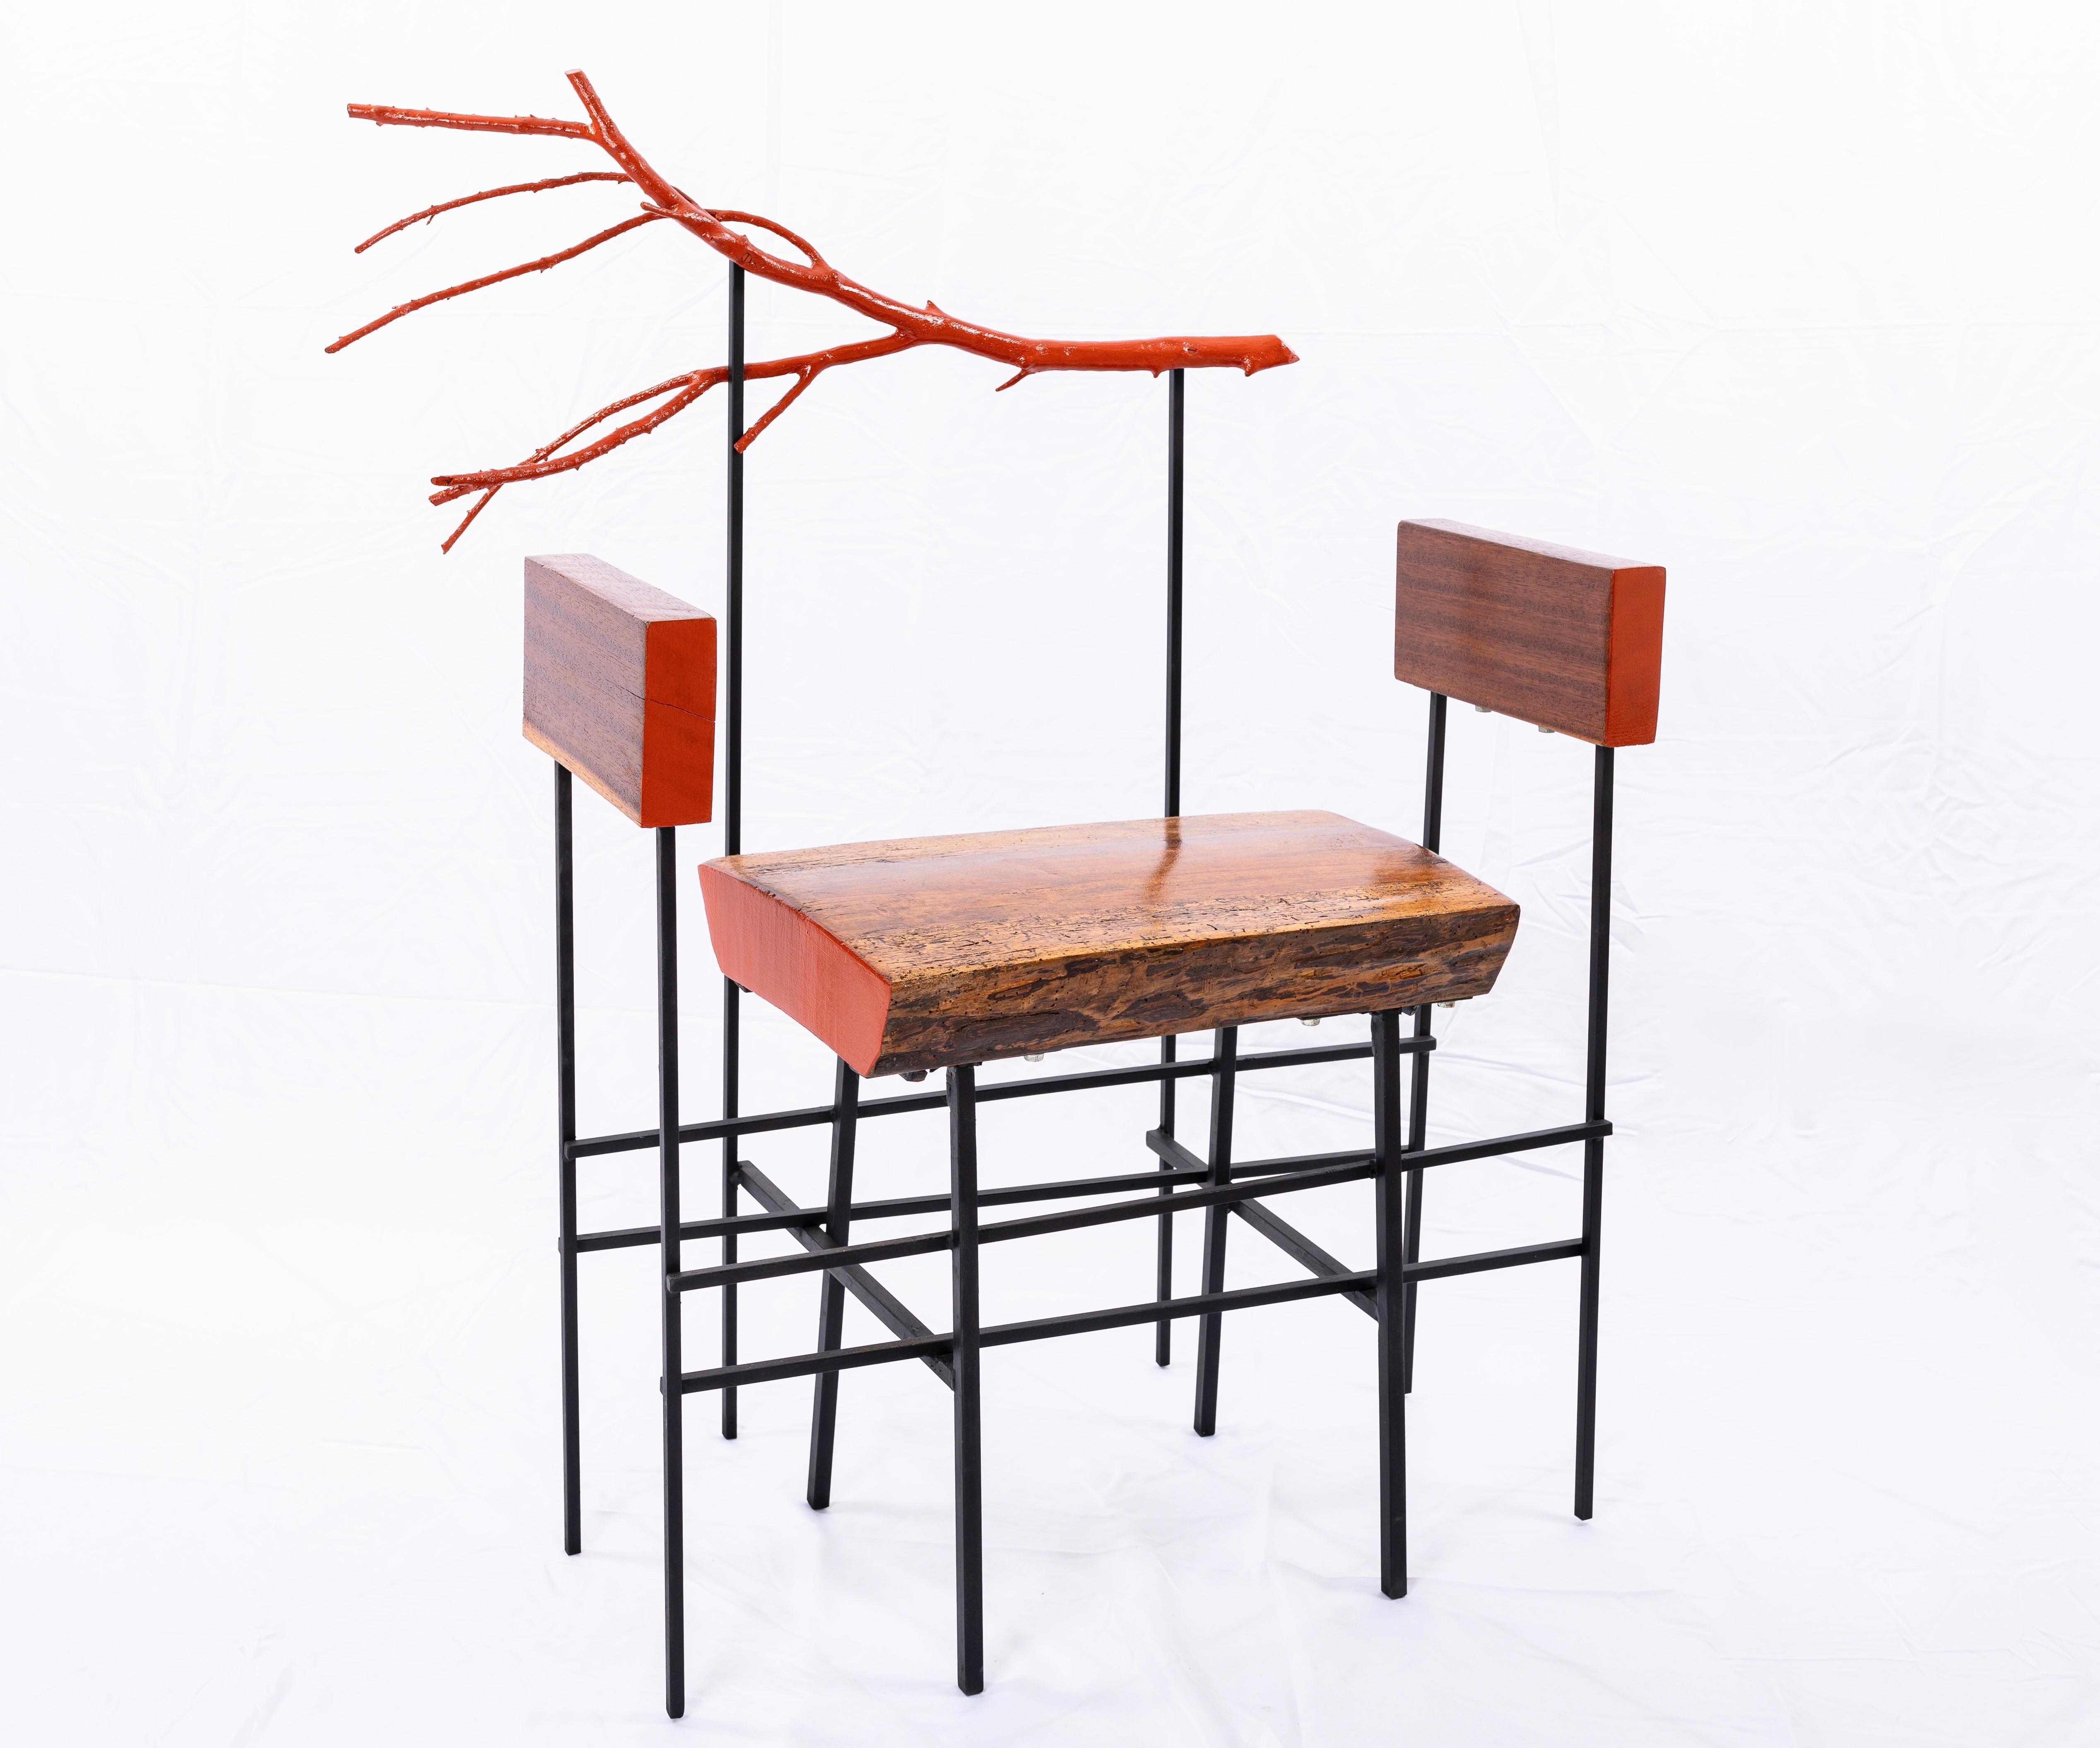 Handmade Trono Del Re Del Vento by Le Meduse
Unique piece
Dimensions: W 95 x D 55 x H 113 cm
Materials: Iron, Exotic Woods, Red-Lacquered Boxwood.

Each model is unique because it is handmade, it can be reproduced in a similar but not identical